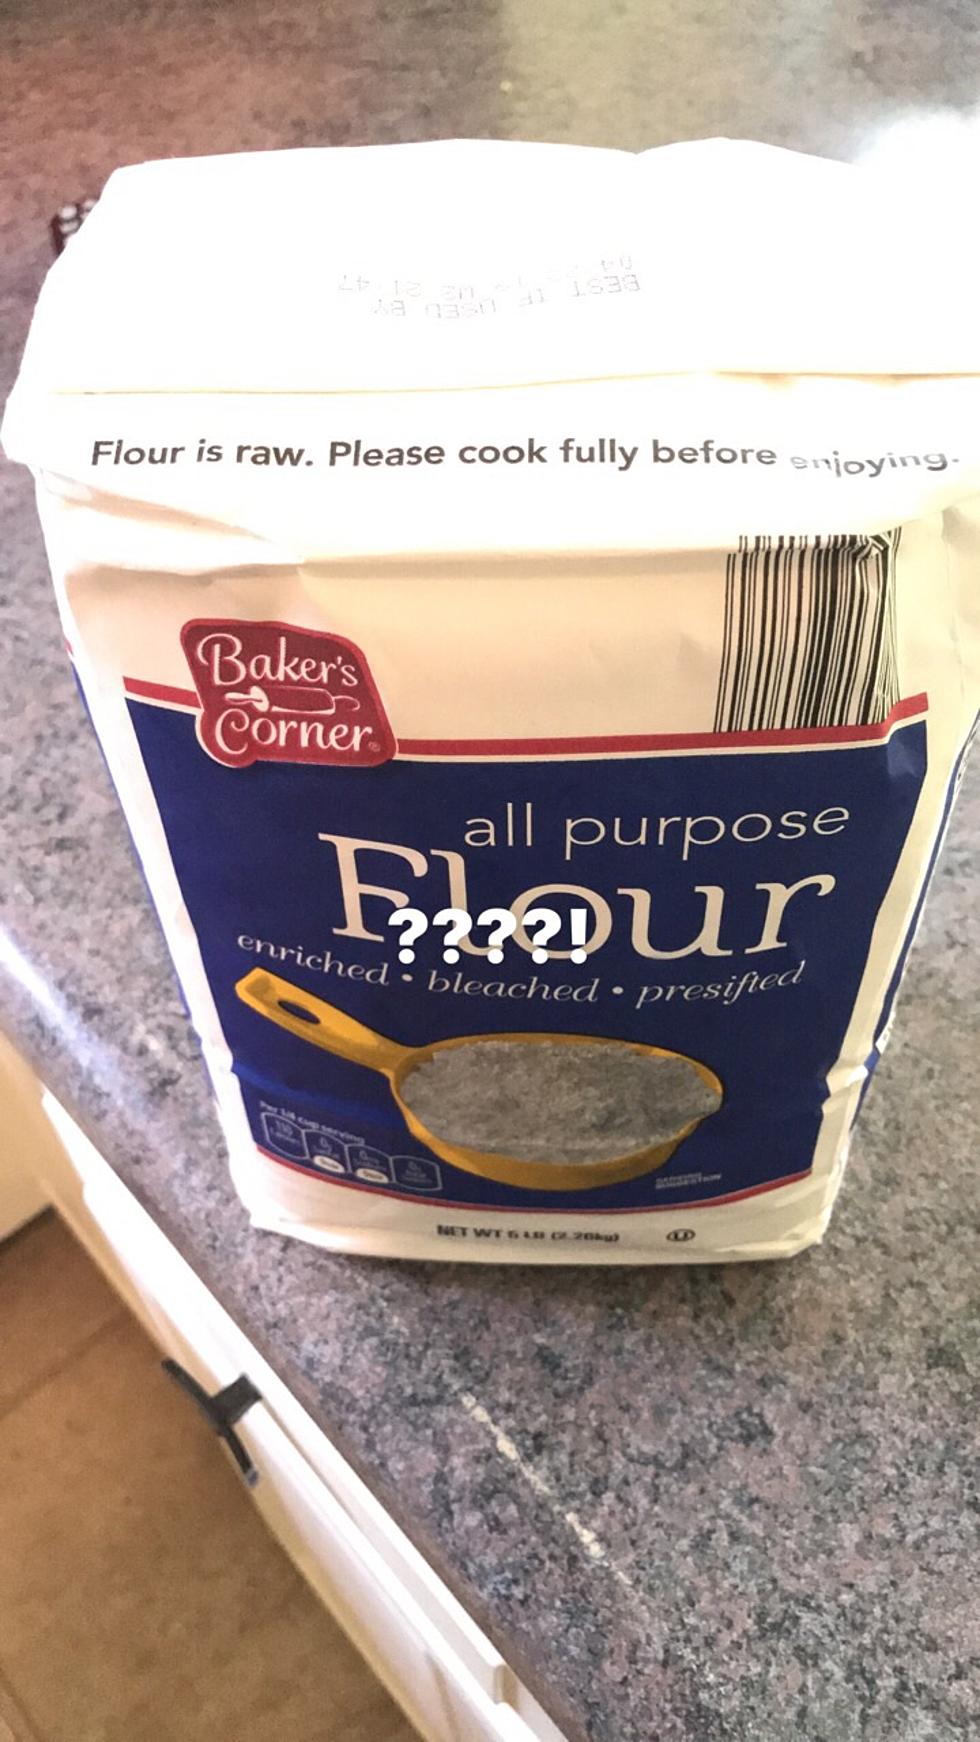 Did You Know That Eating Flour Could Kill You?